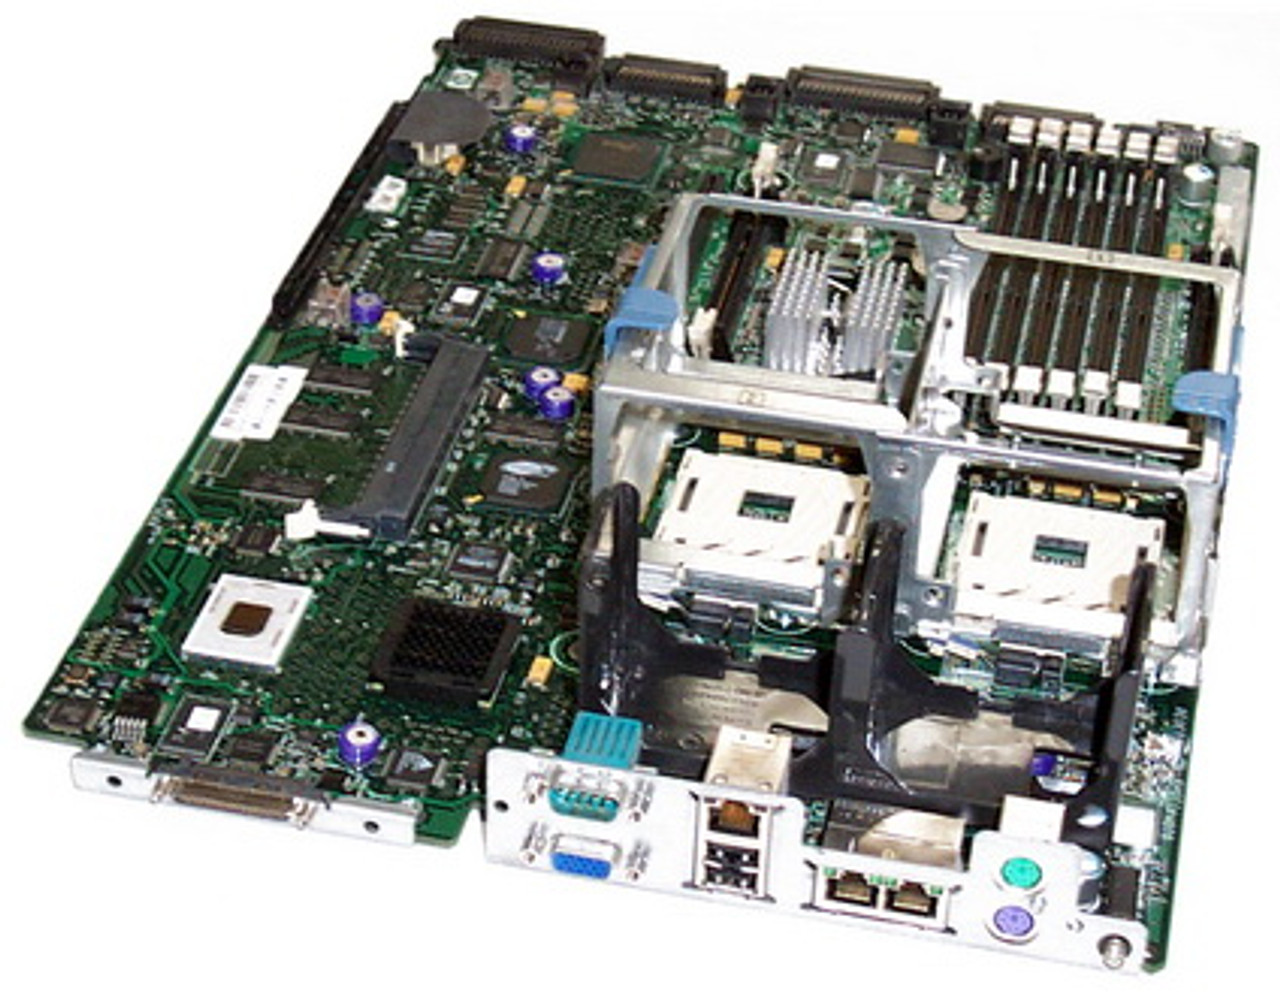 012863-001 - HP System Board with Processor Cage (Dual Core) For HP Proliant DL380 G4 Server